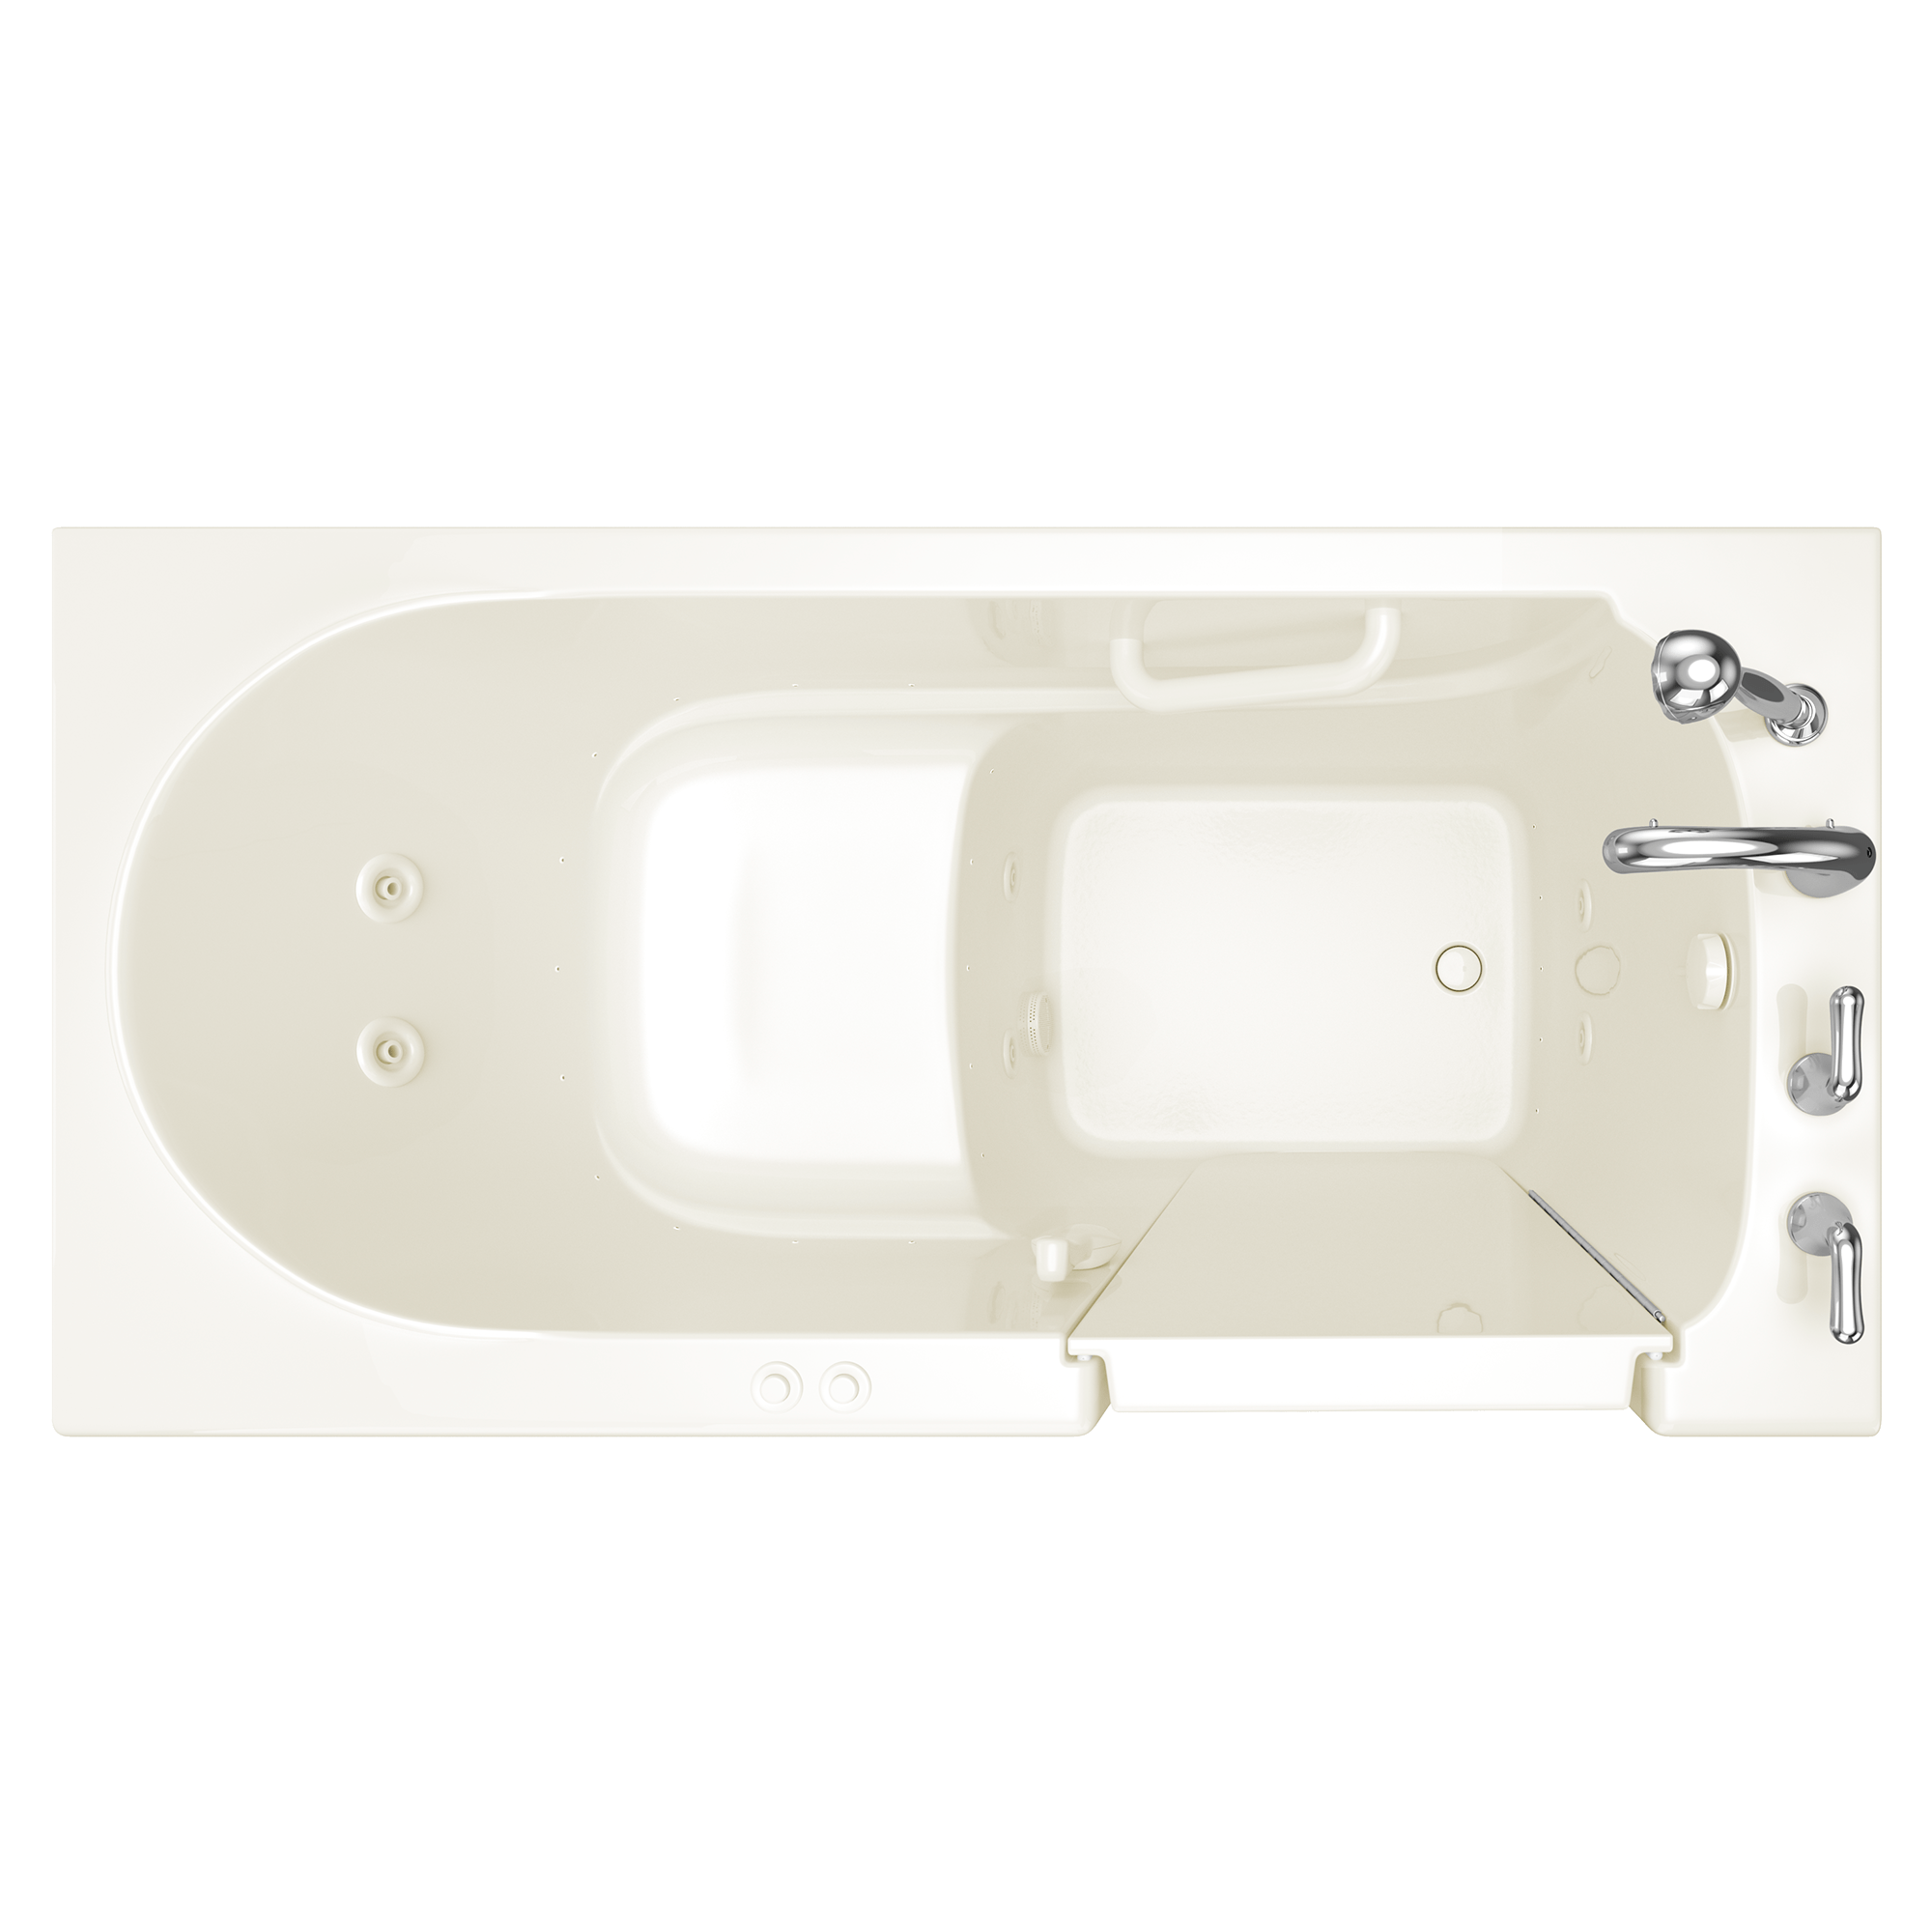 Gelcoat Entry Series 60 x 30-Inch Walk-In Tub With Combination Air Spa and Whirlpool Systems – Right-Hand Drain With Faucet